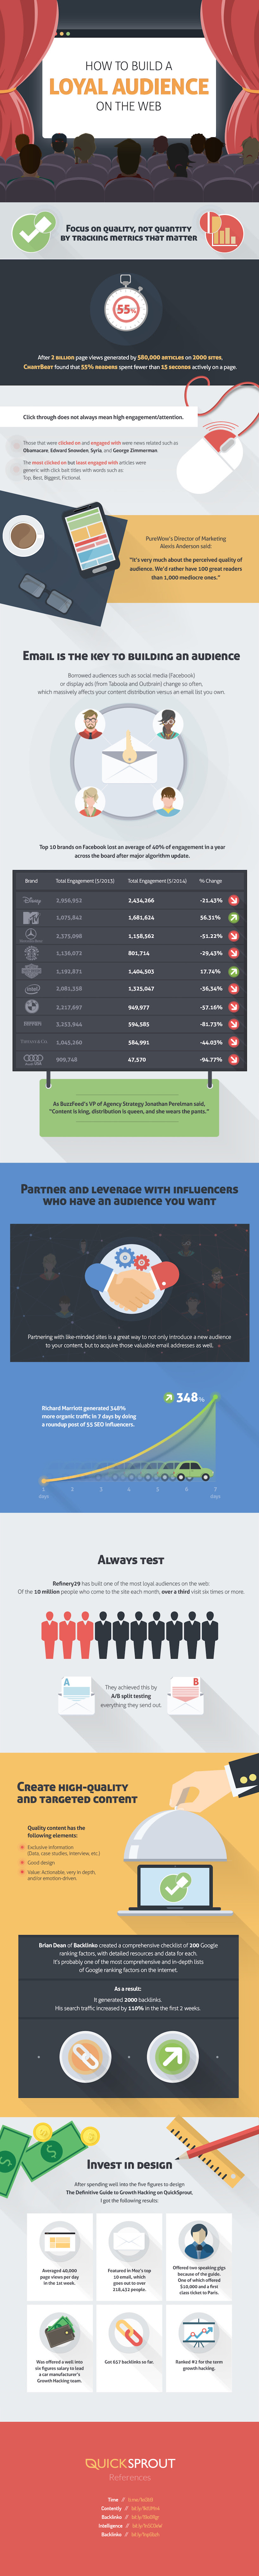 How to Build A Loyal Audience On The Web - #infographic #contentmarketing #socialmedia